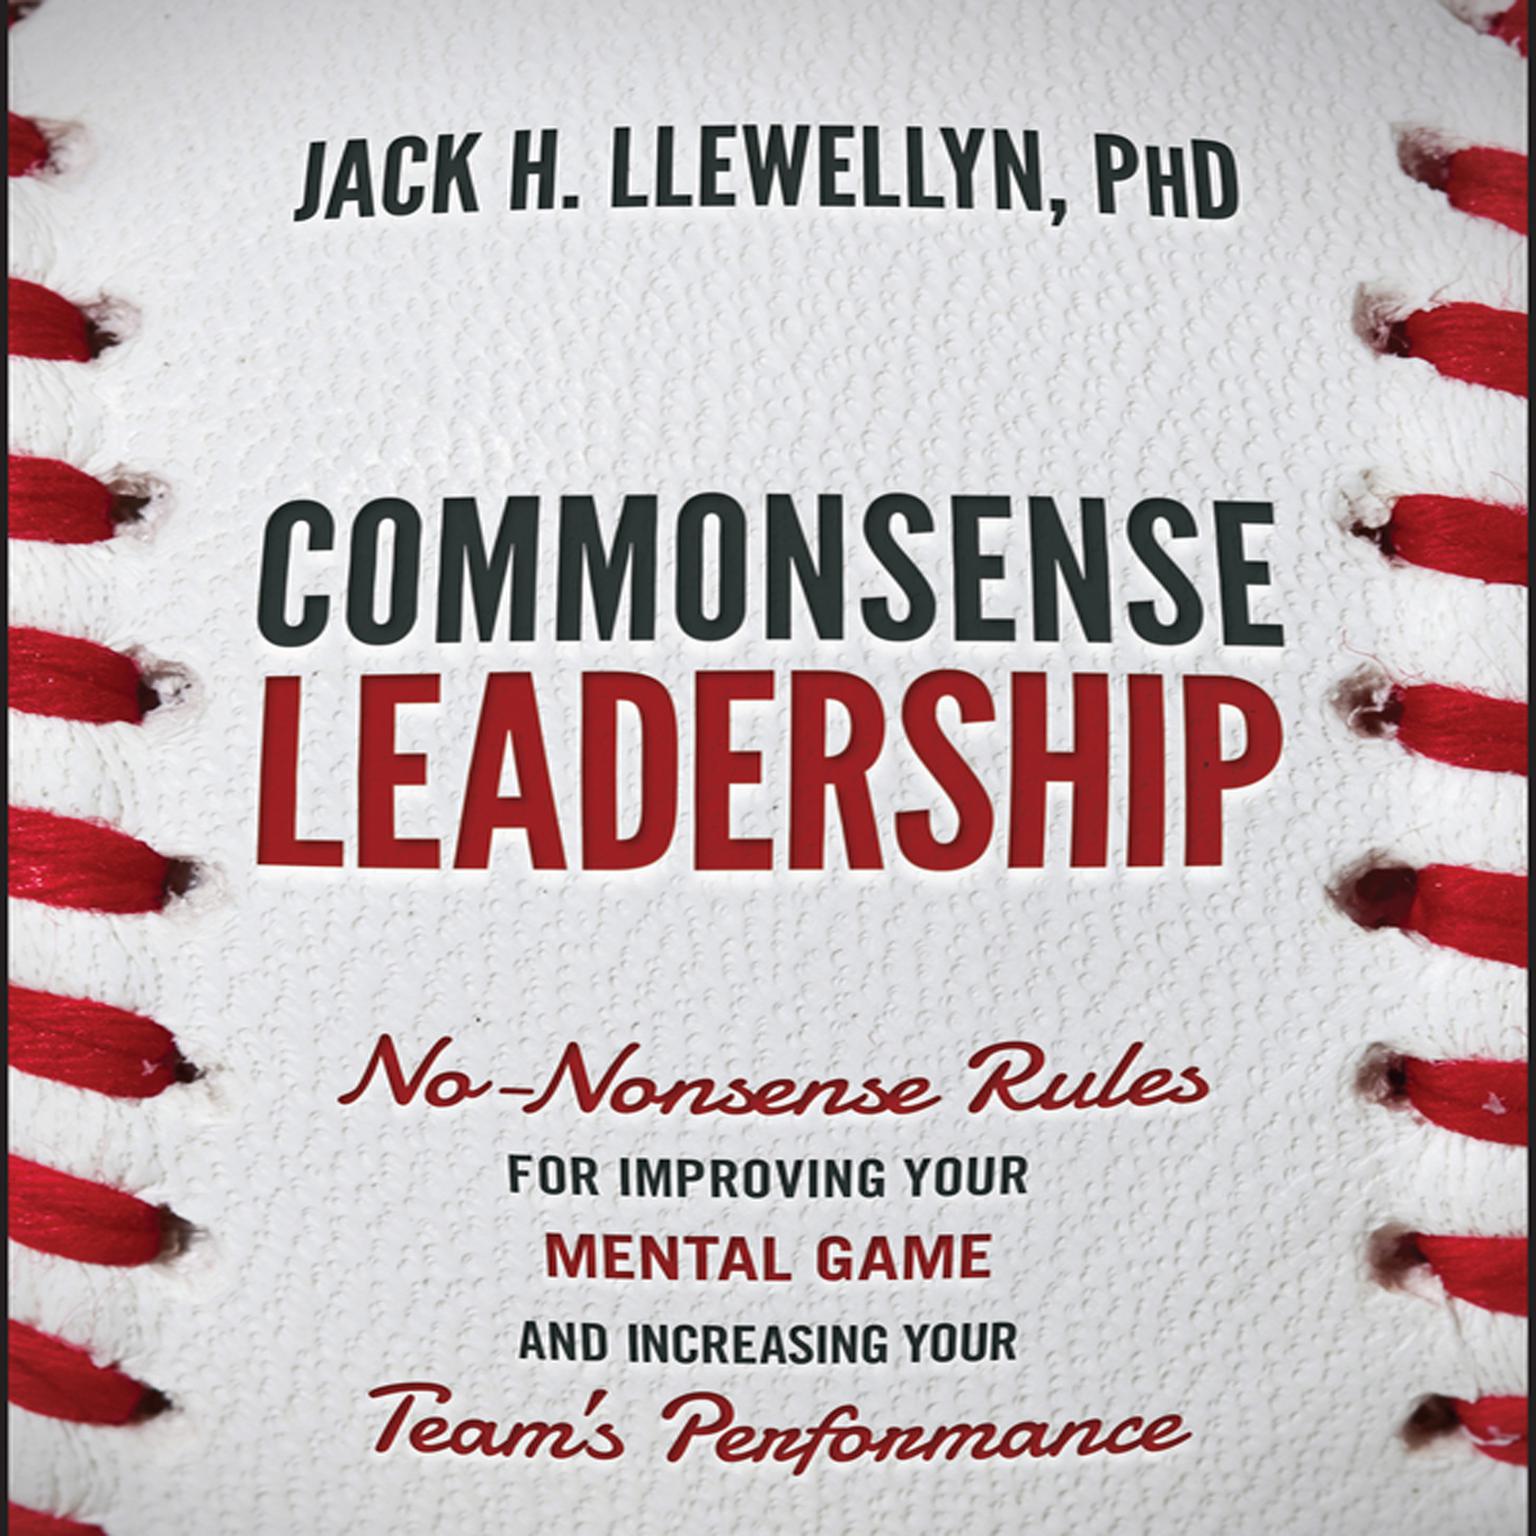 Commonsense Leadership: No-Nonsense Rules for Improving our Mental Game and Increasing Your Teams Performance Audiobook, by Jaak H. Llewellyn